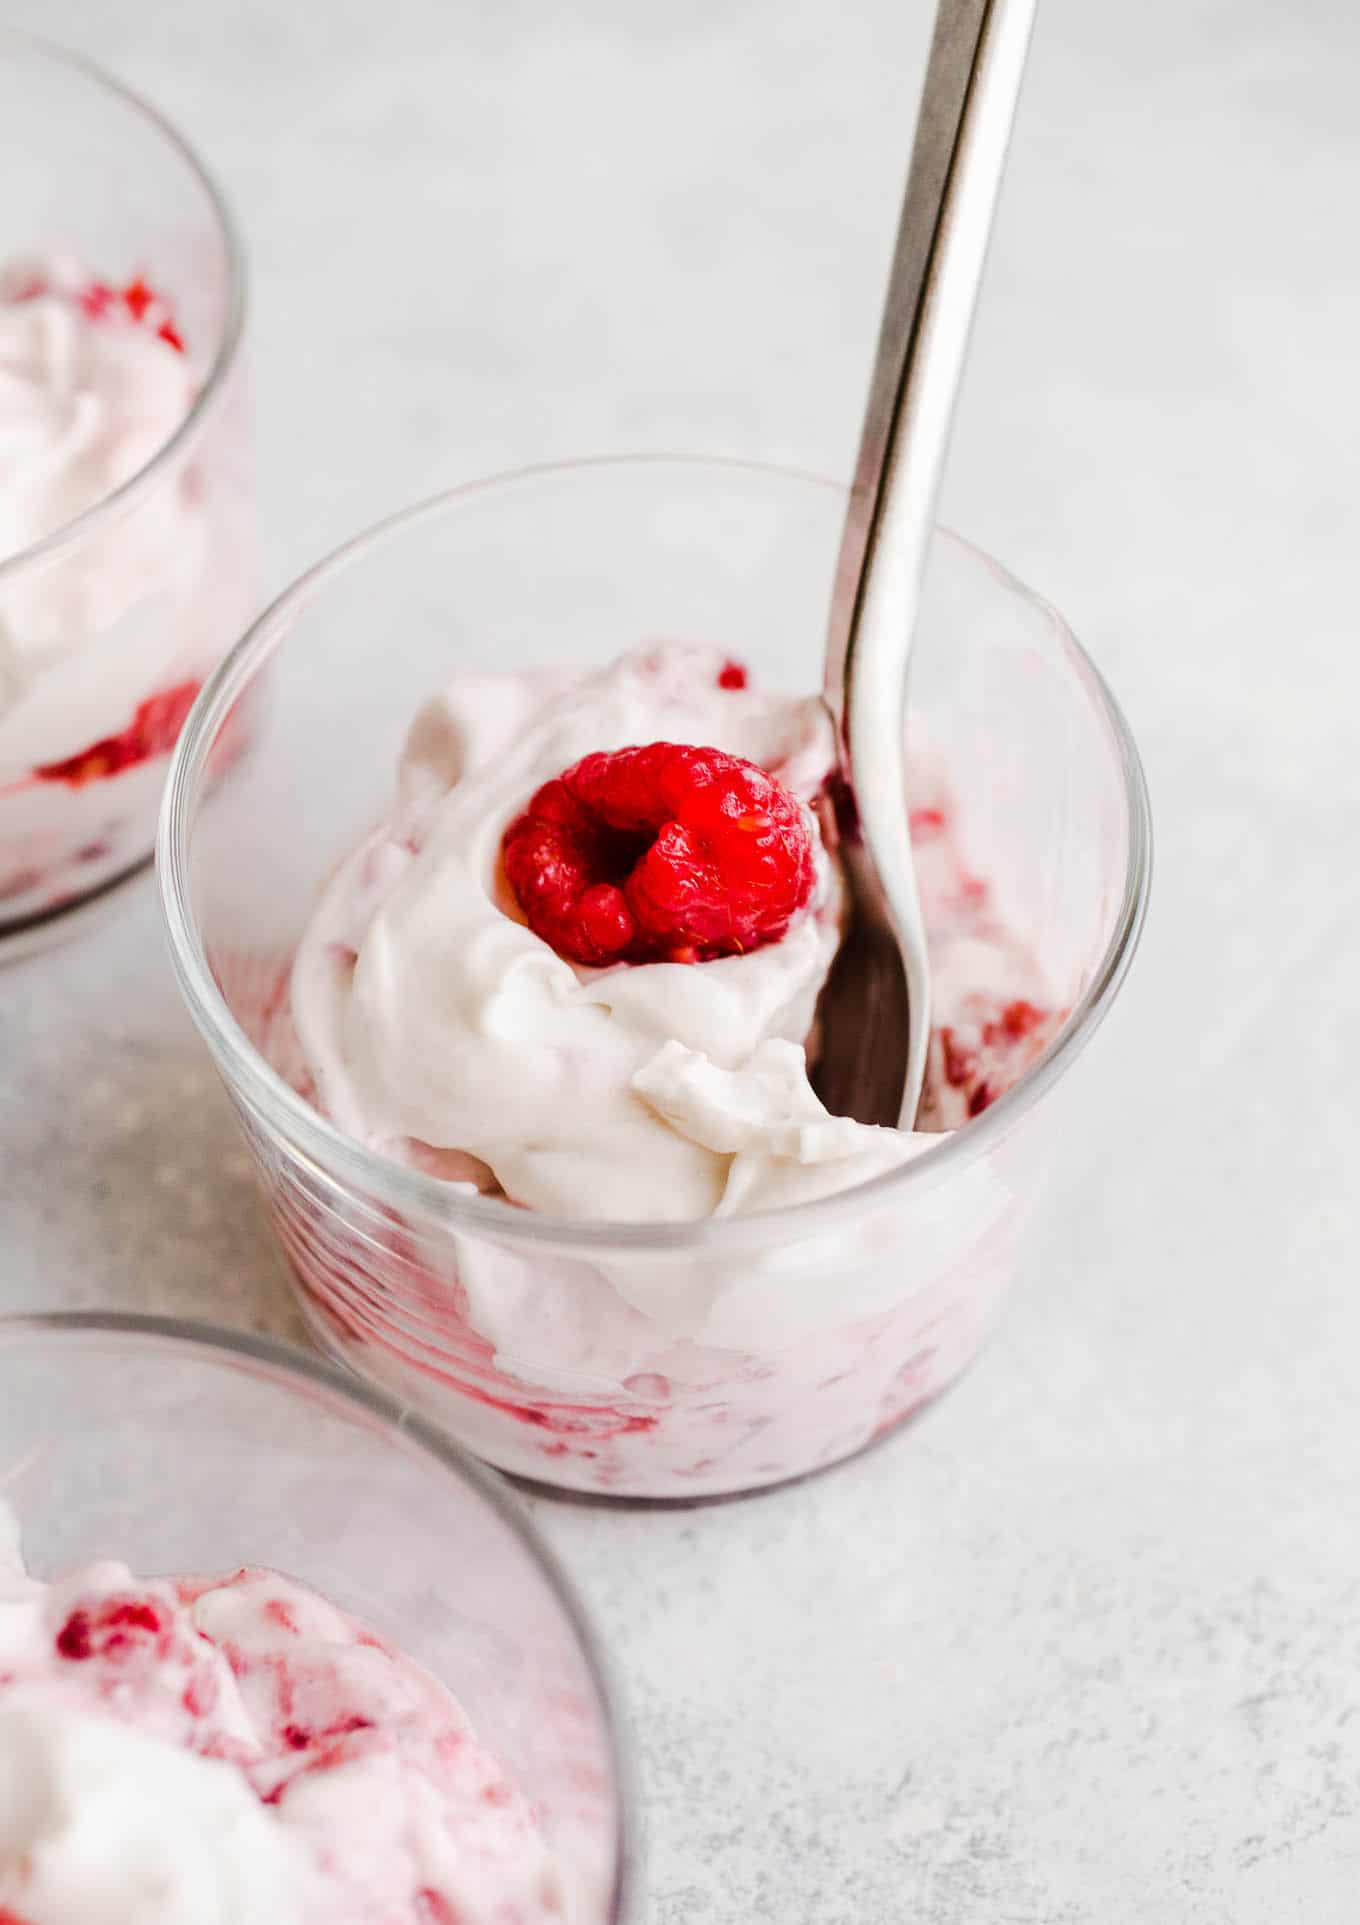 Coconut whipped cream and fresh raspberries in cup